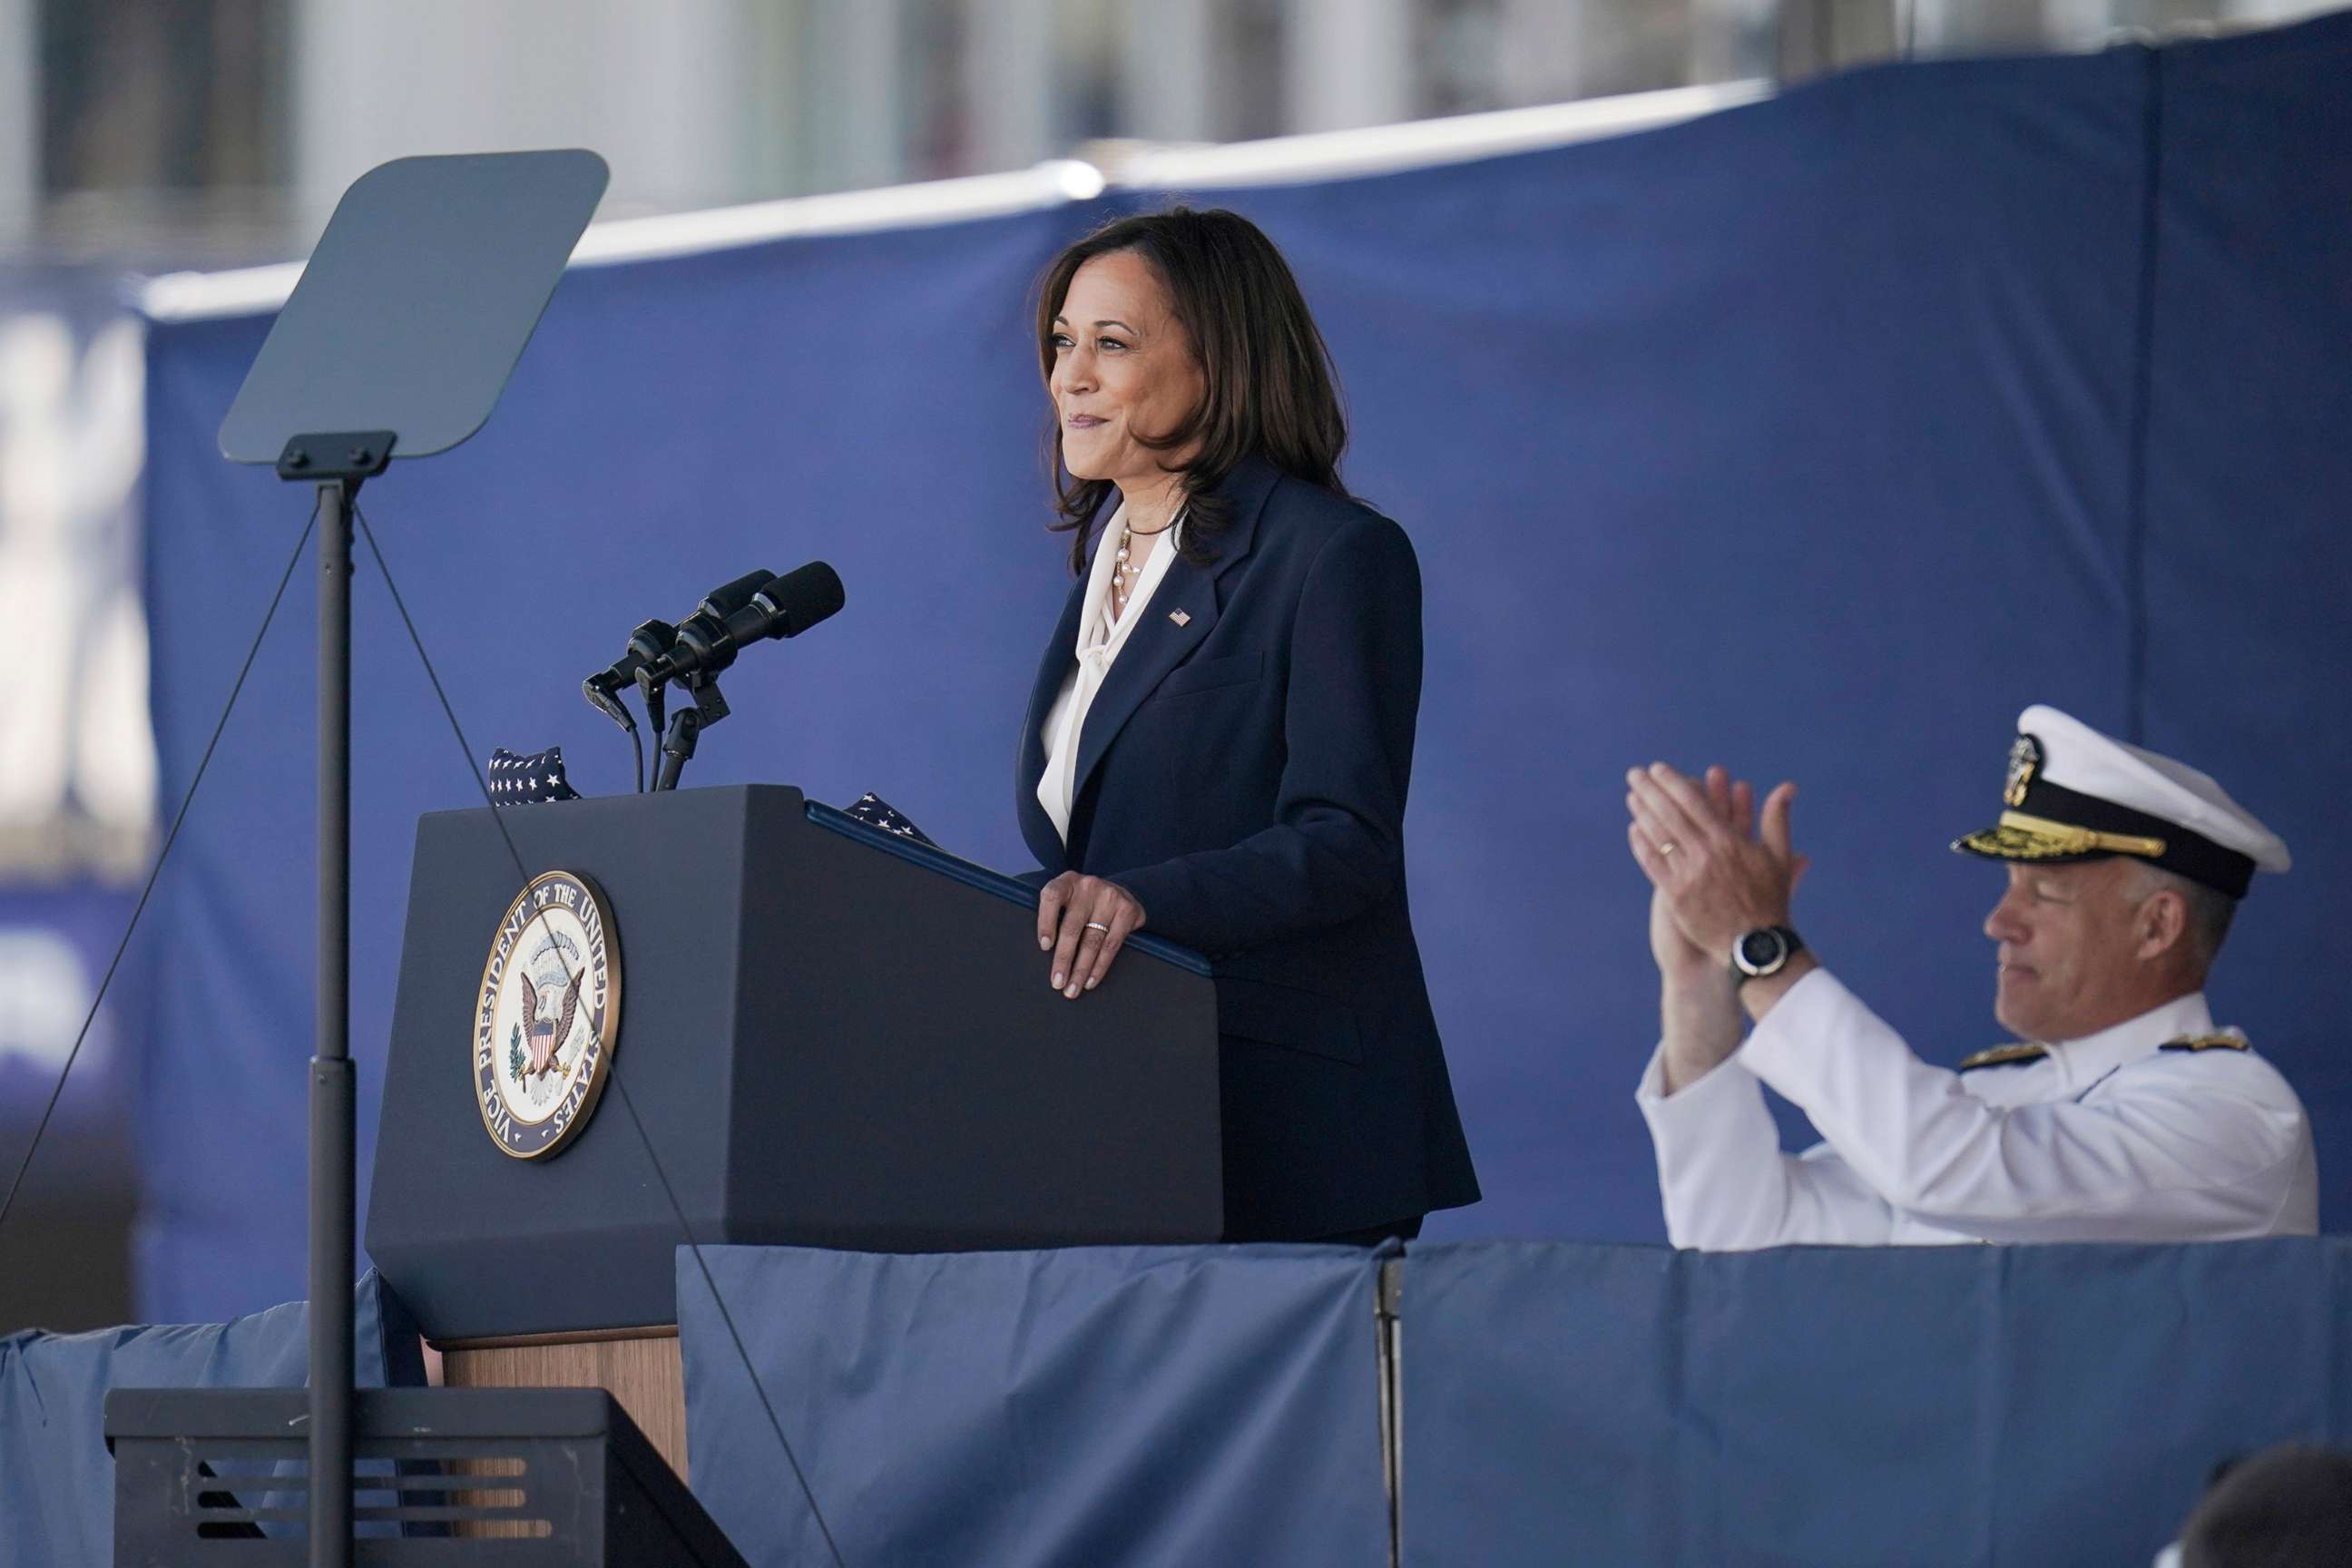 PHOTO: Vice President Kamala Harris speaks at the graduation and commission ceremony at the U.S. Naval Academy in Annapolis, Md., May 28, 2021.